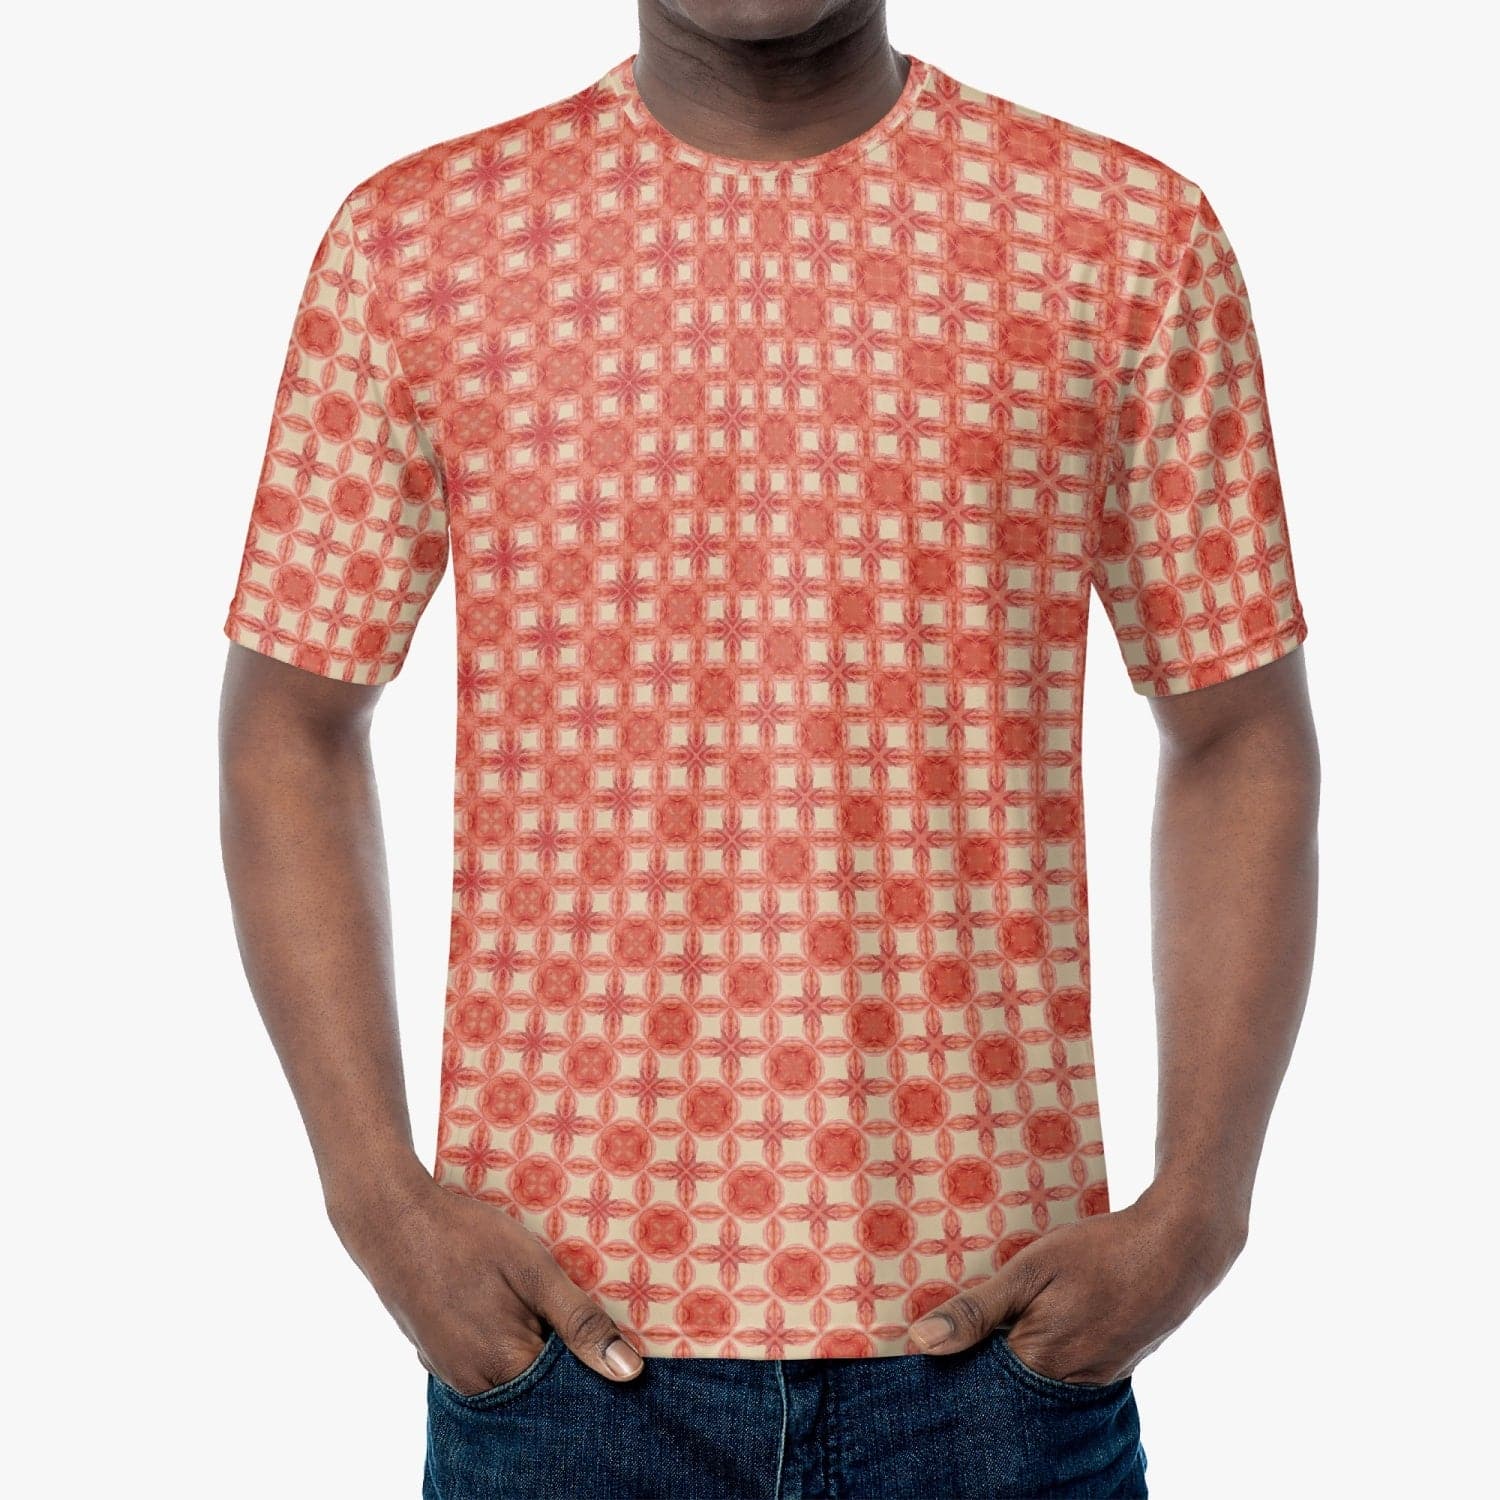 Sensus Studio Design Red and Cream Sophisticated Stylish Patterned Handmade T-shirt for Men